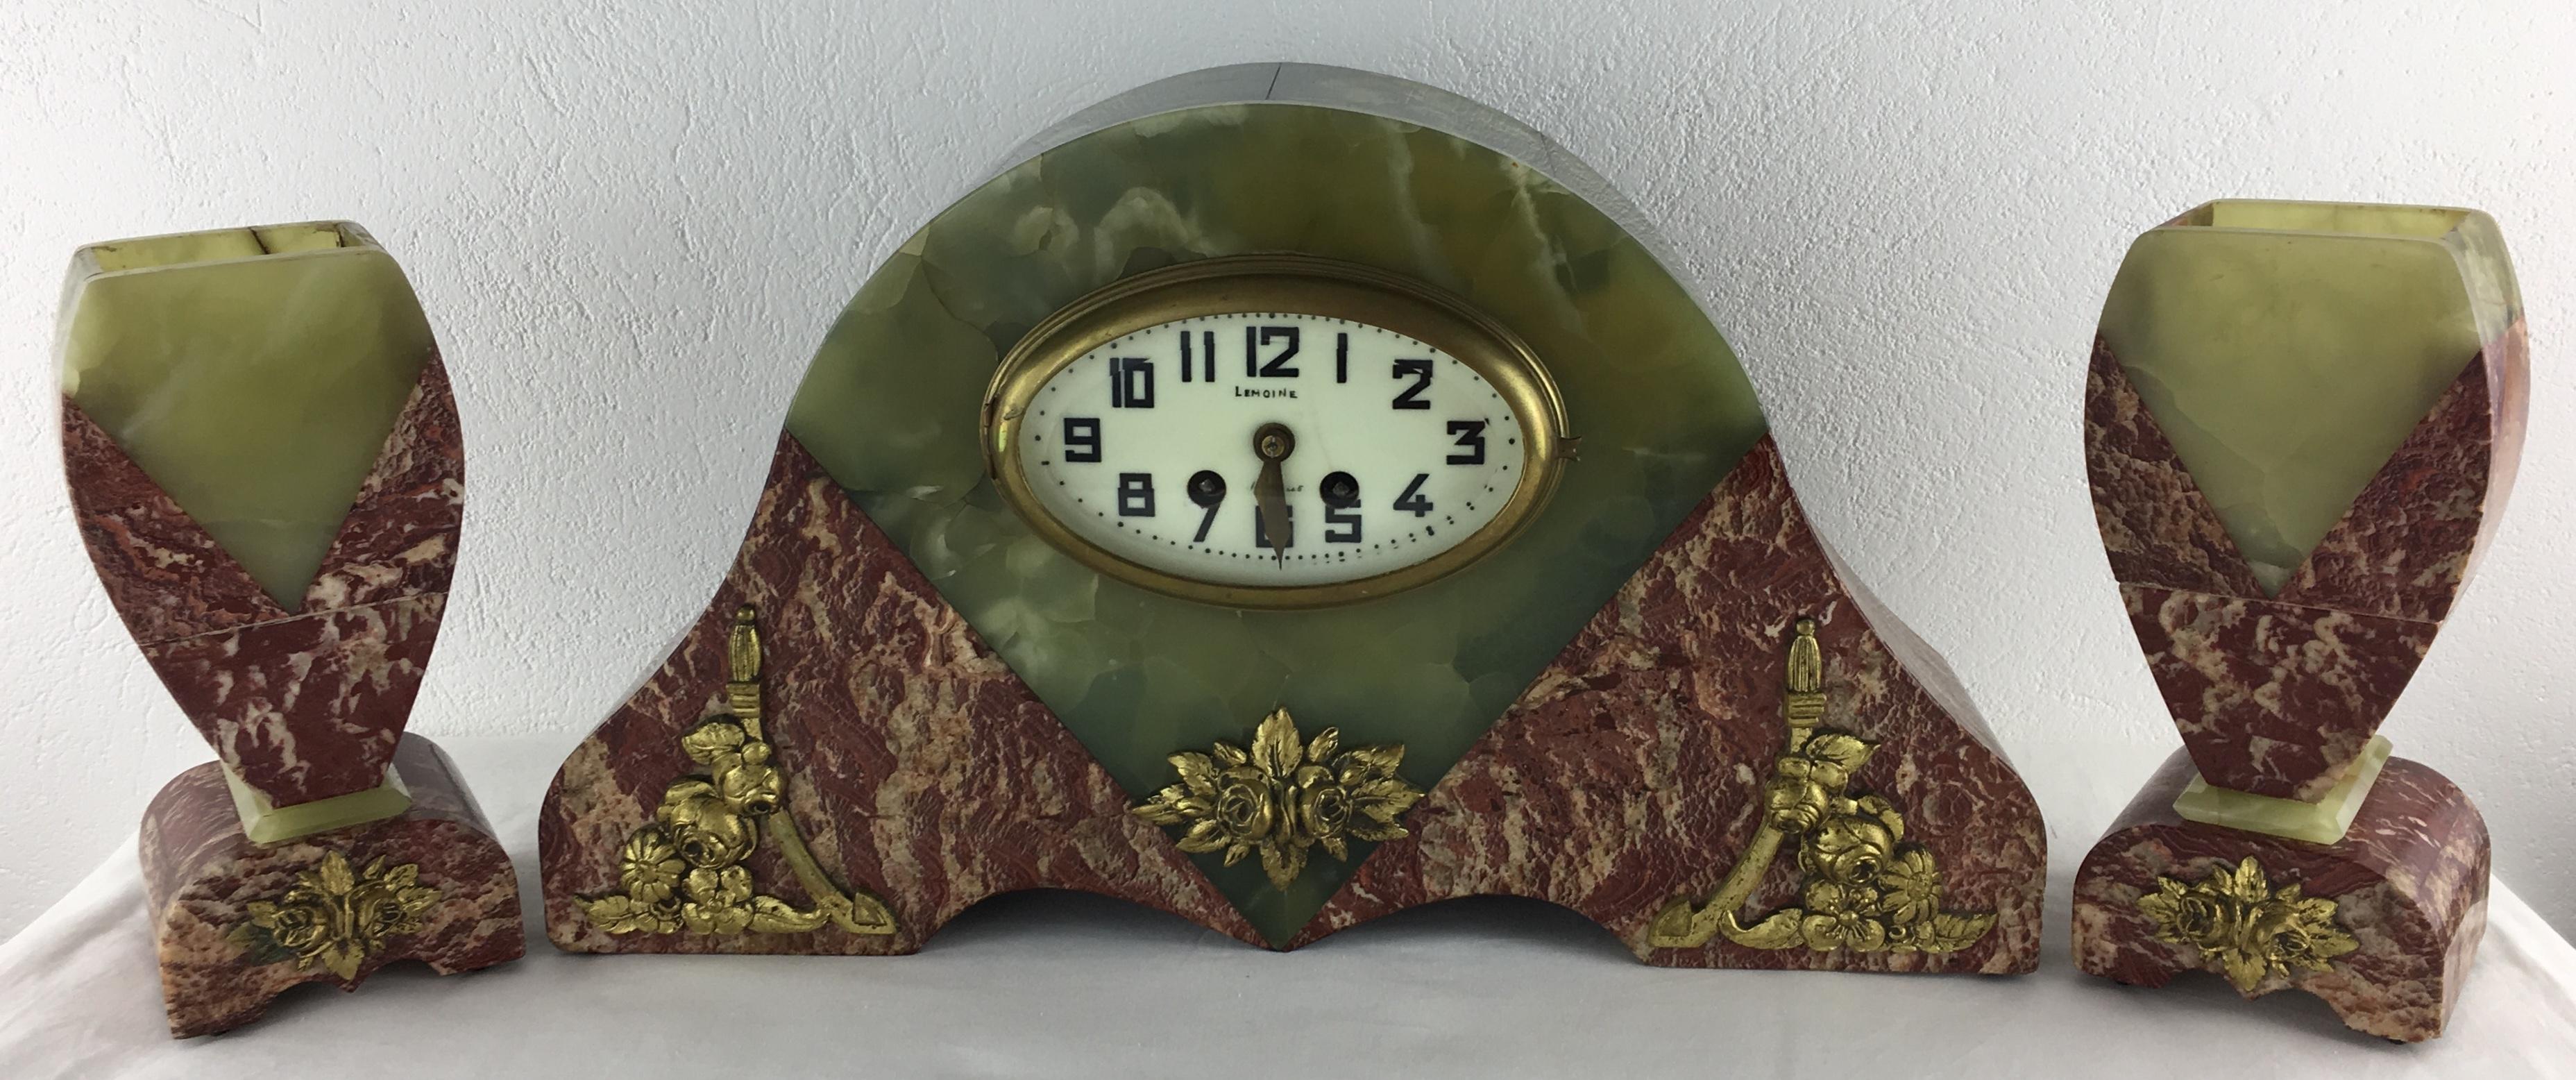 French Art Deco Mantel Clock Marble and Onyx Set by Lemoine Bonnet & Pottier In Good Condition For Sale In Miami, FL